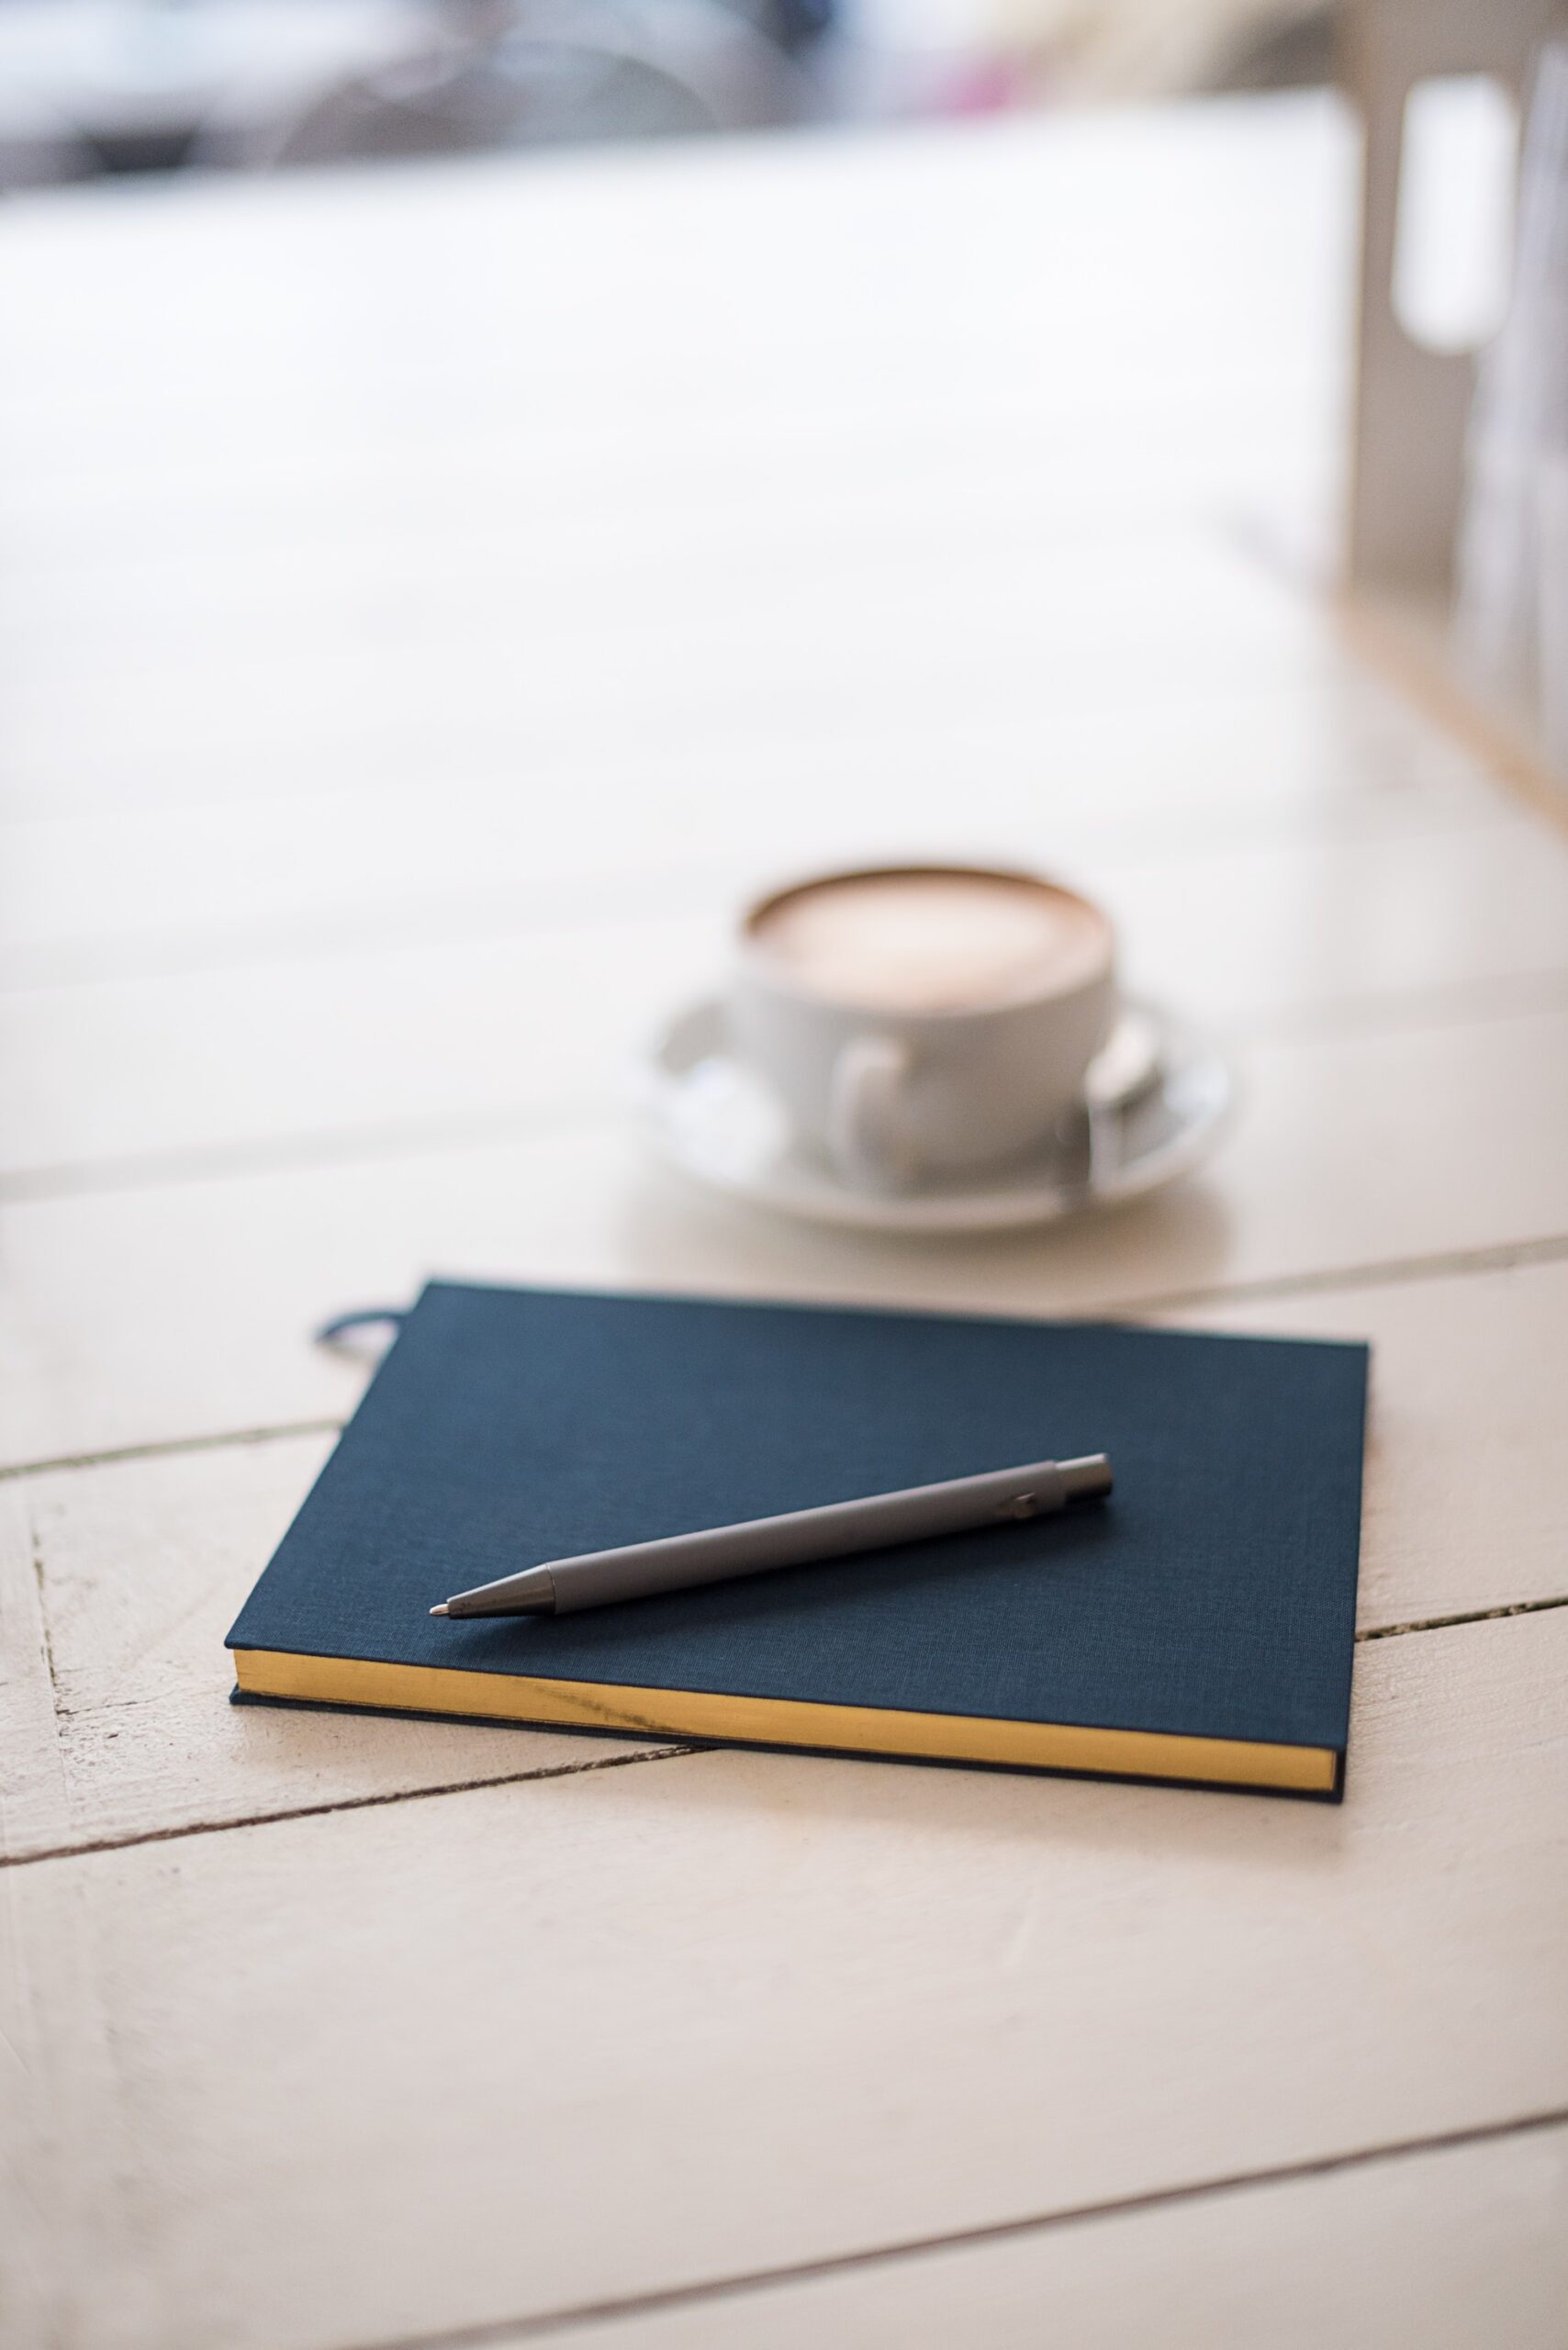 Writers with BPD: How I Use Journaling to Improve My Life